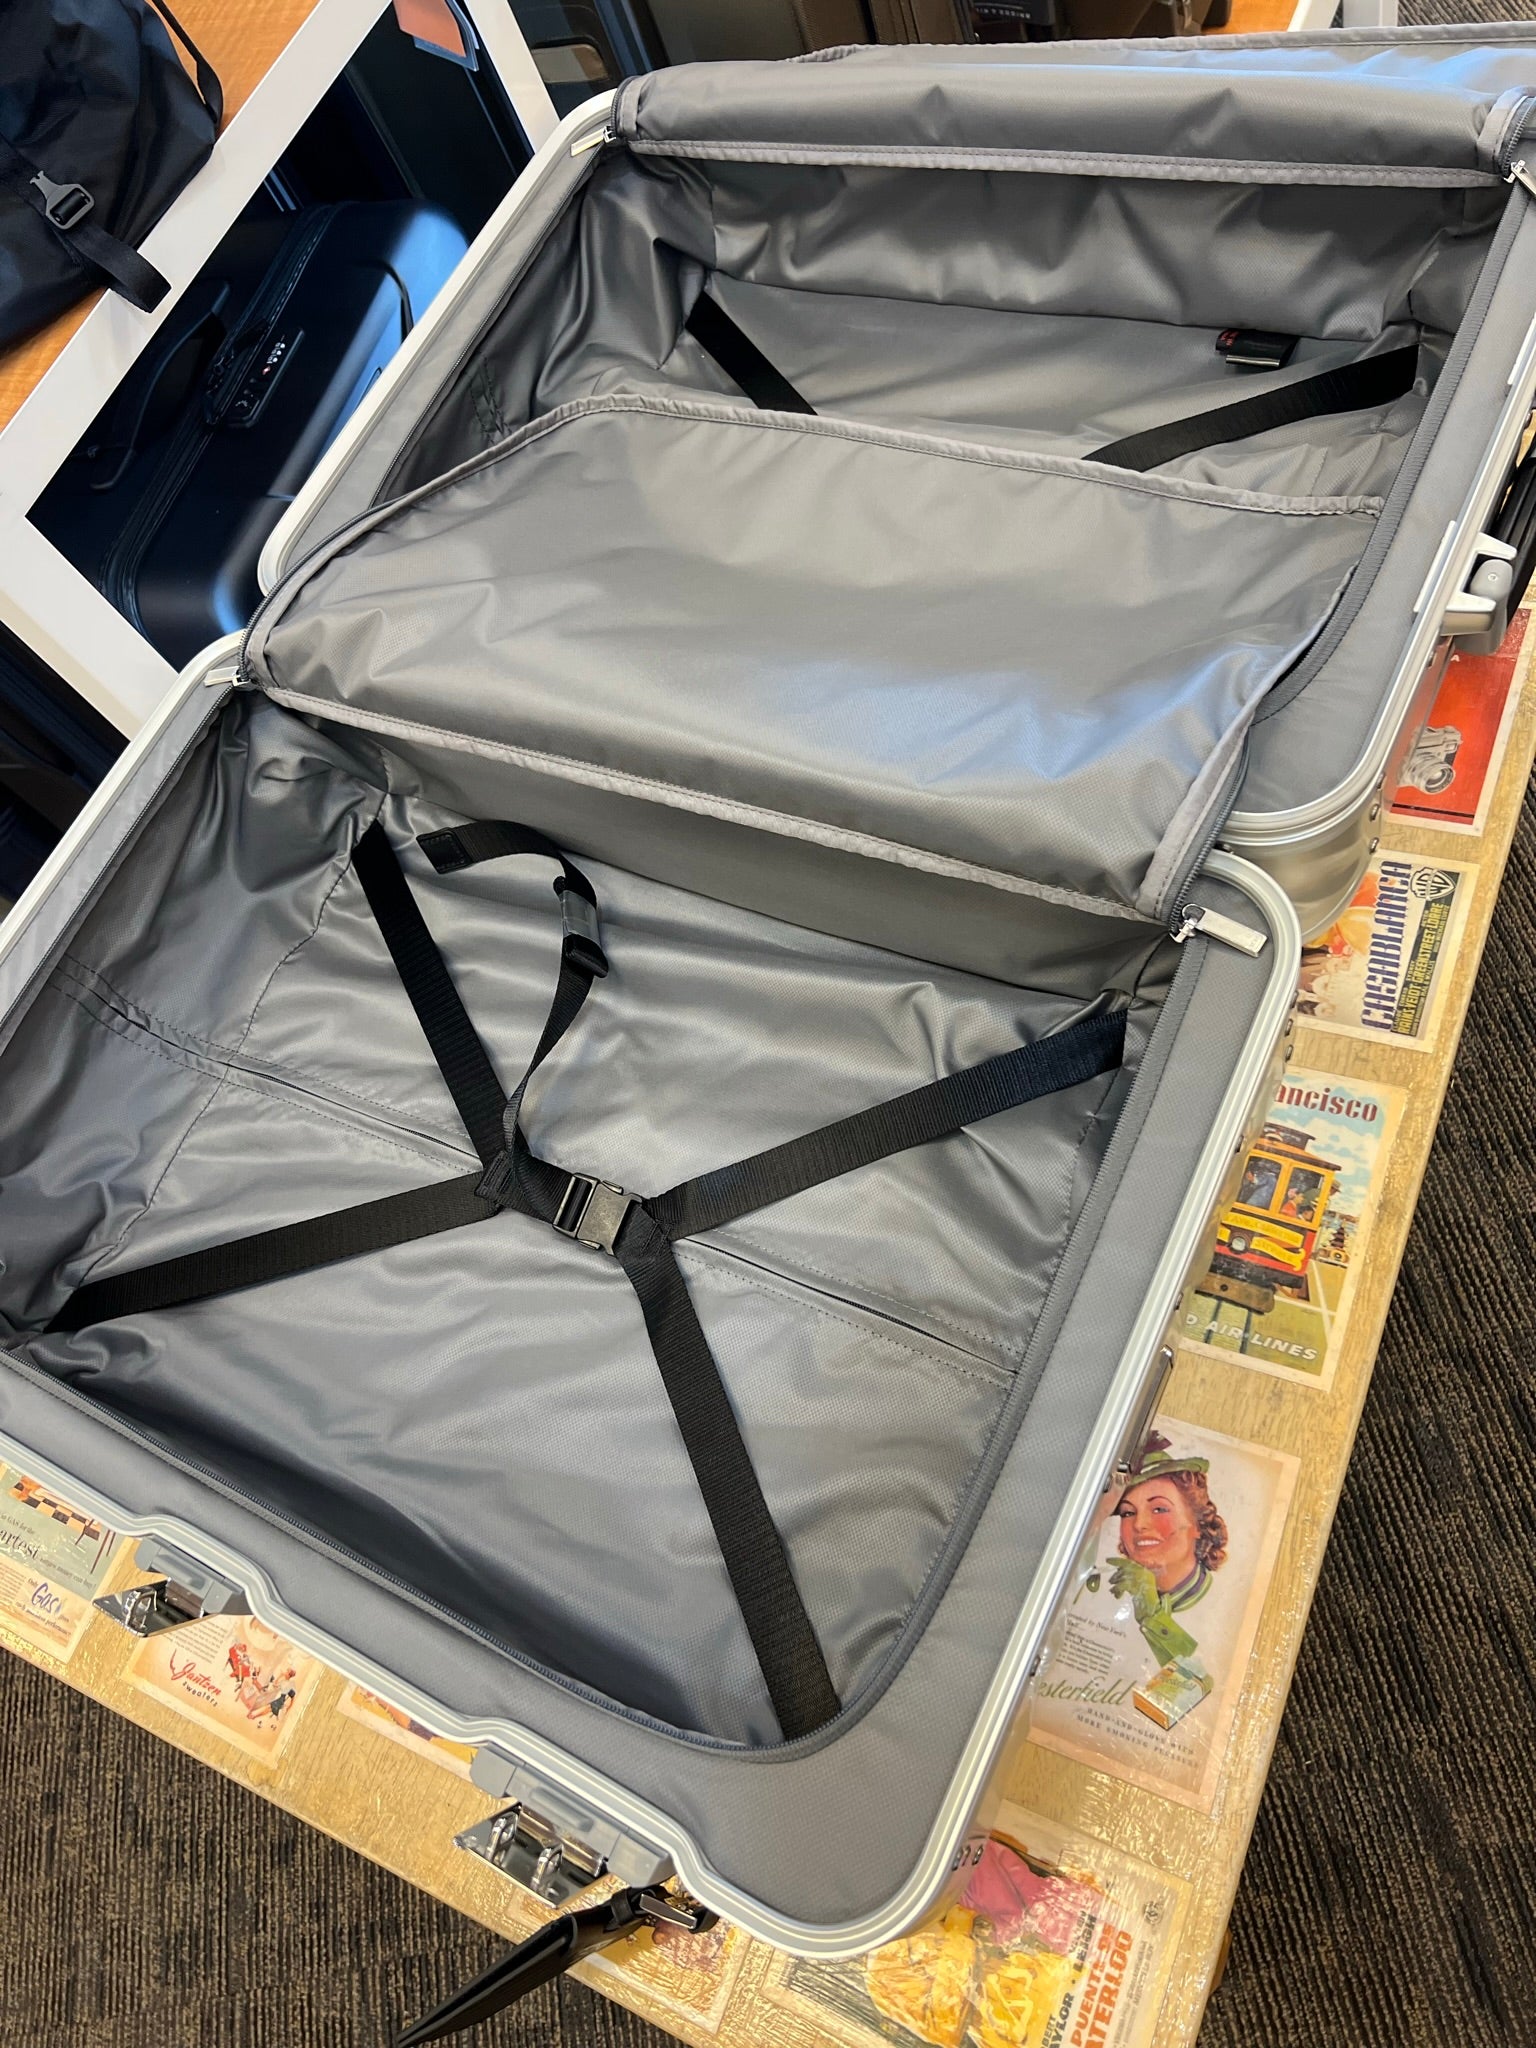 Travel angle: 5 things we love about the Tumi 19 Degree collection